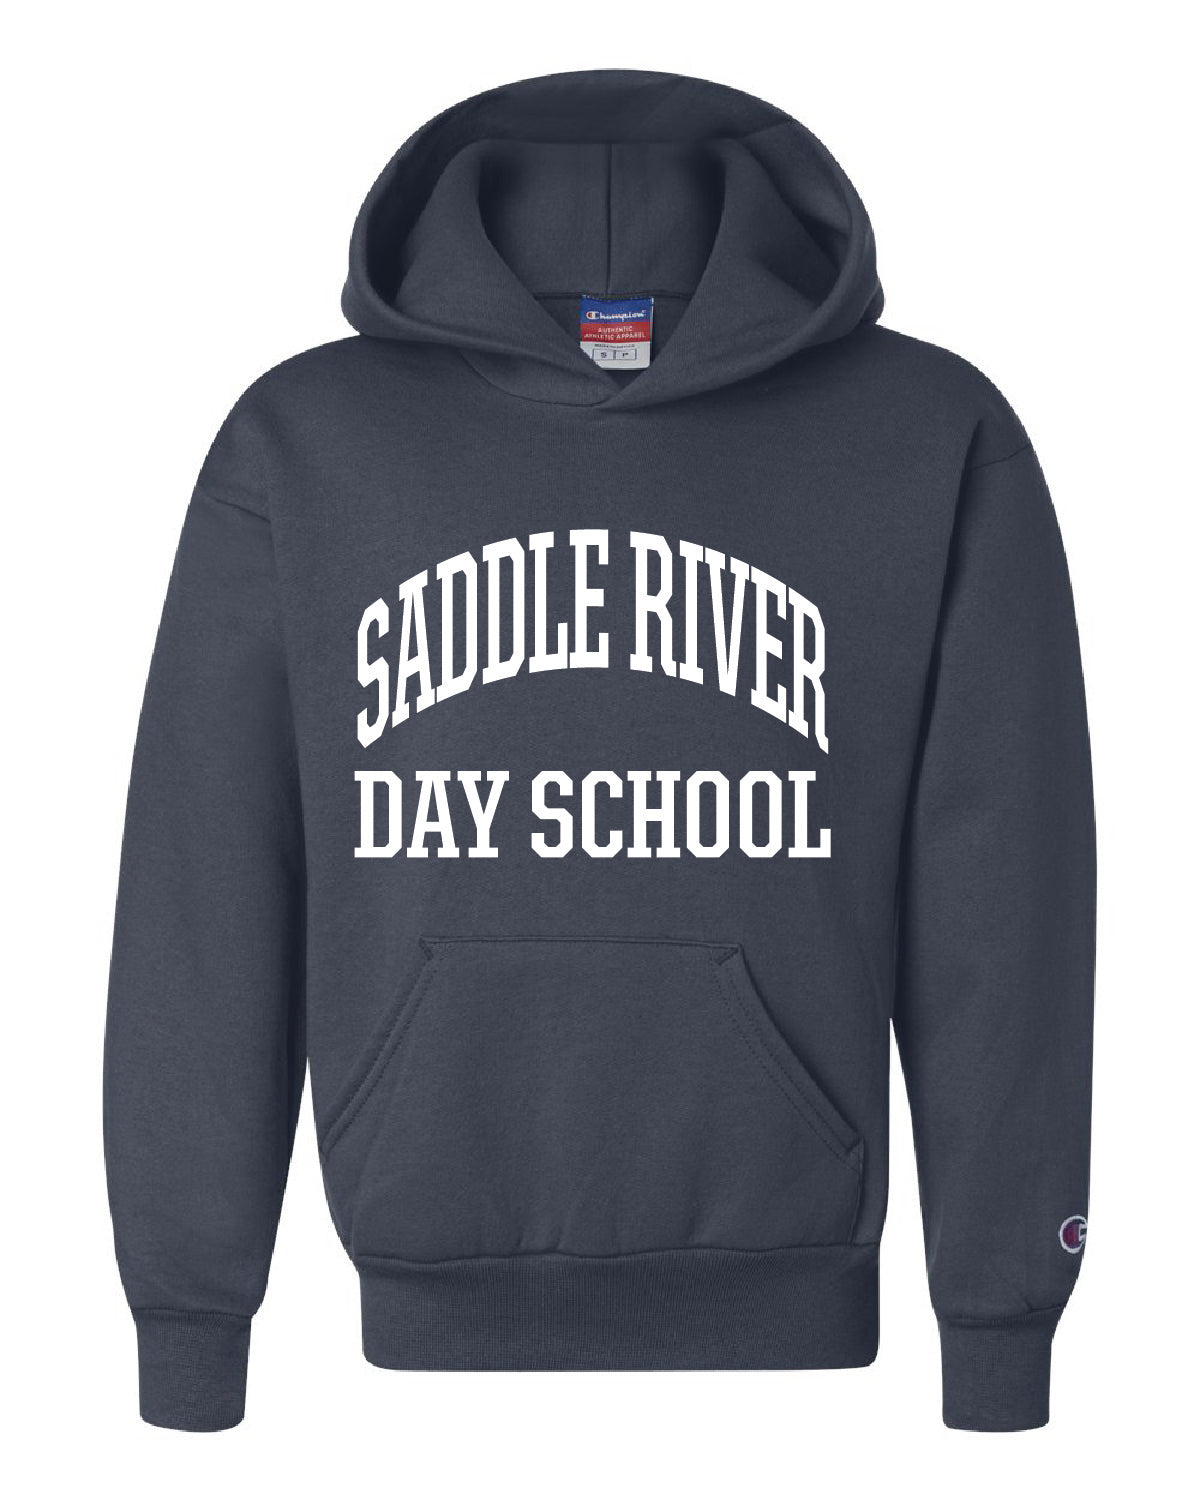 Saddle River Day School Classic Arched Champion Powerblend Youth Hooded Sweatshirt